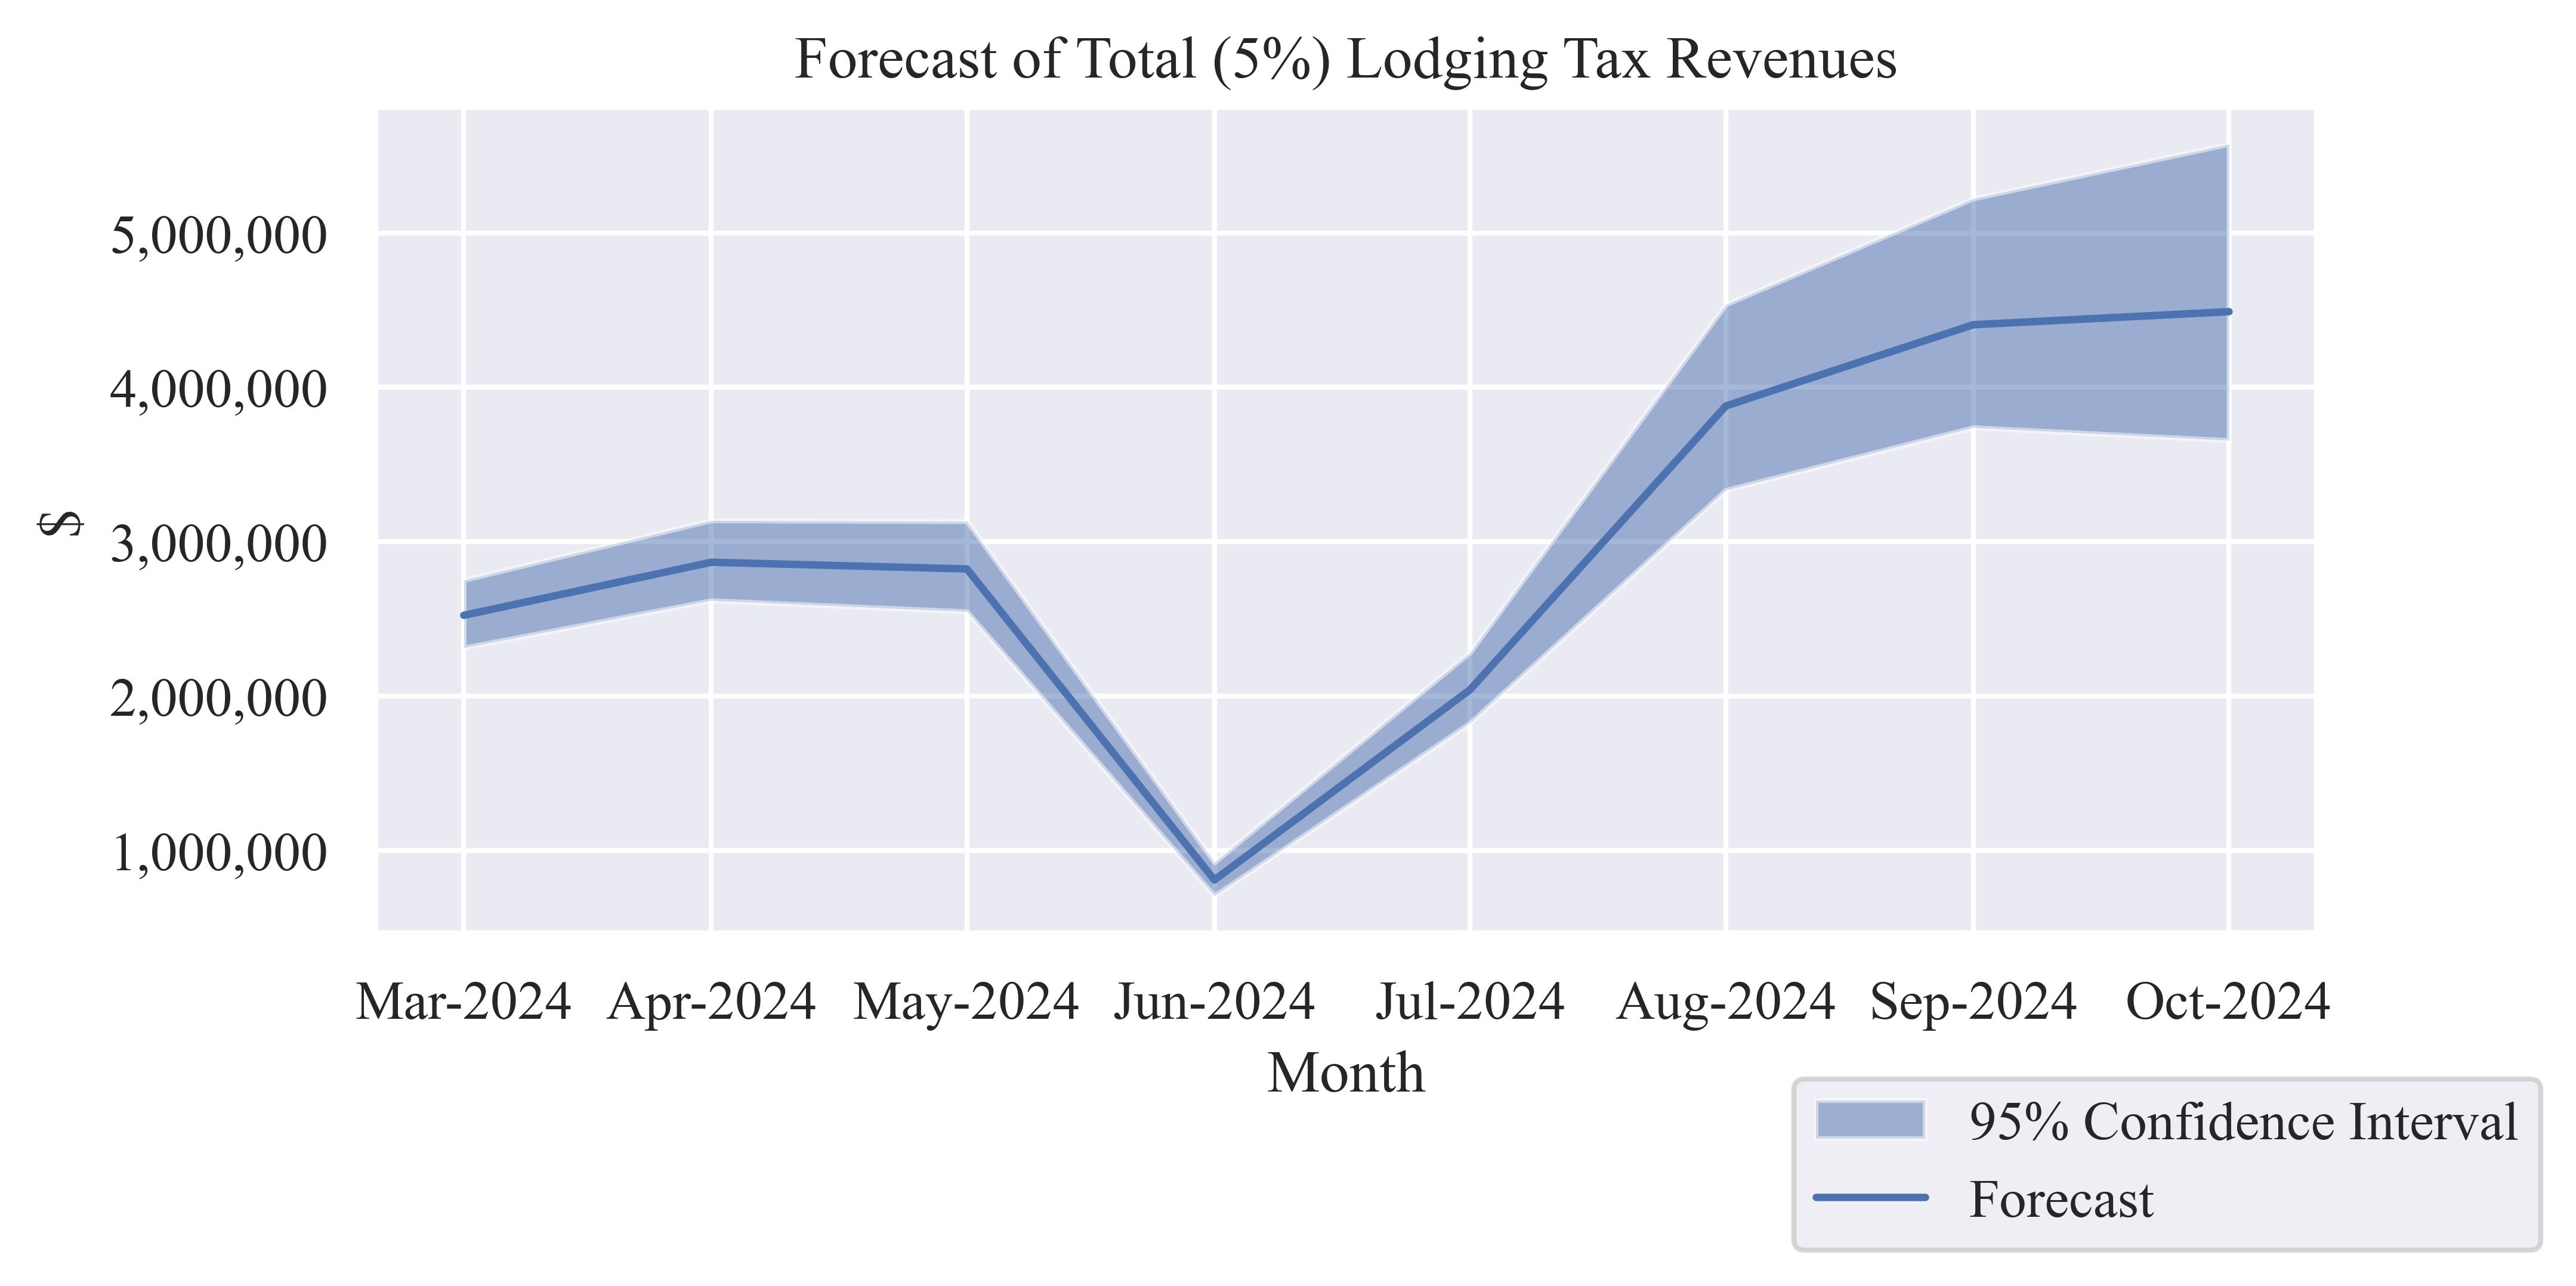 Forecast of Monthly Total (5%) Lodging Tax Revenue